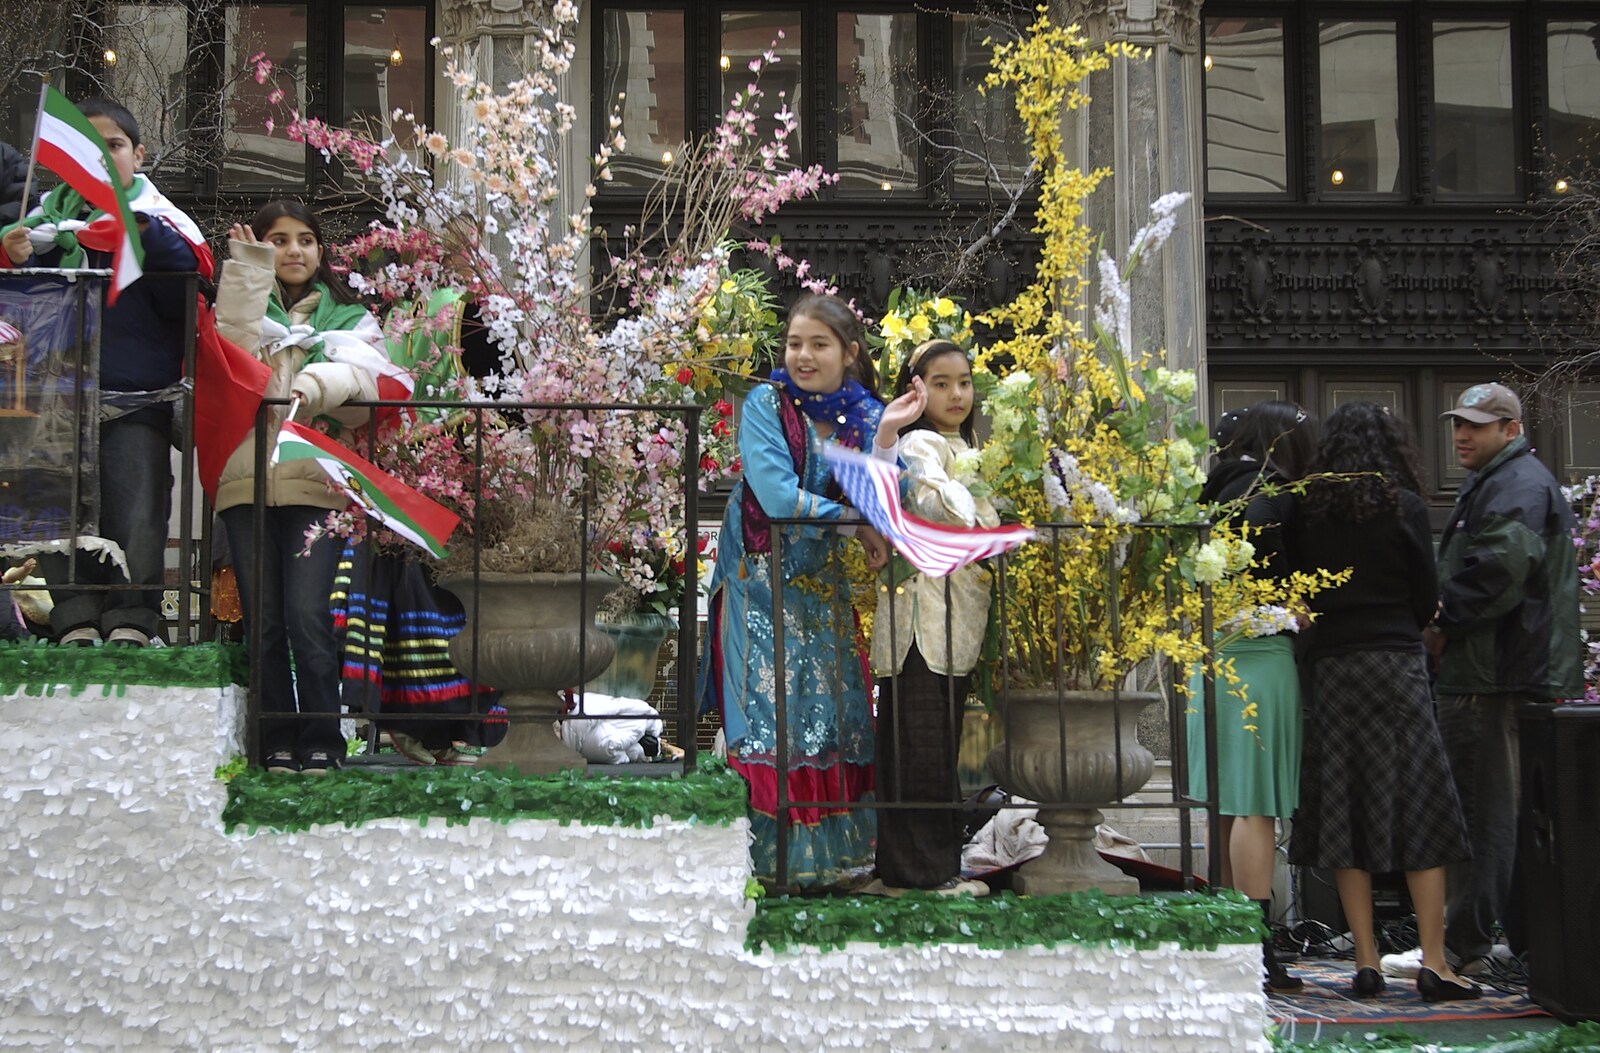 Persian Day Parade, Upper East Side and Midtown, New York, US - 25th March 2007: Girls on a float